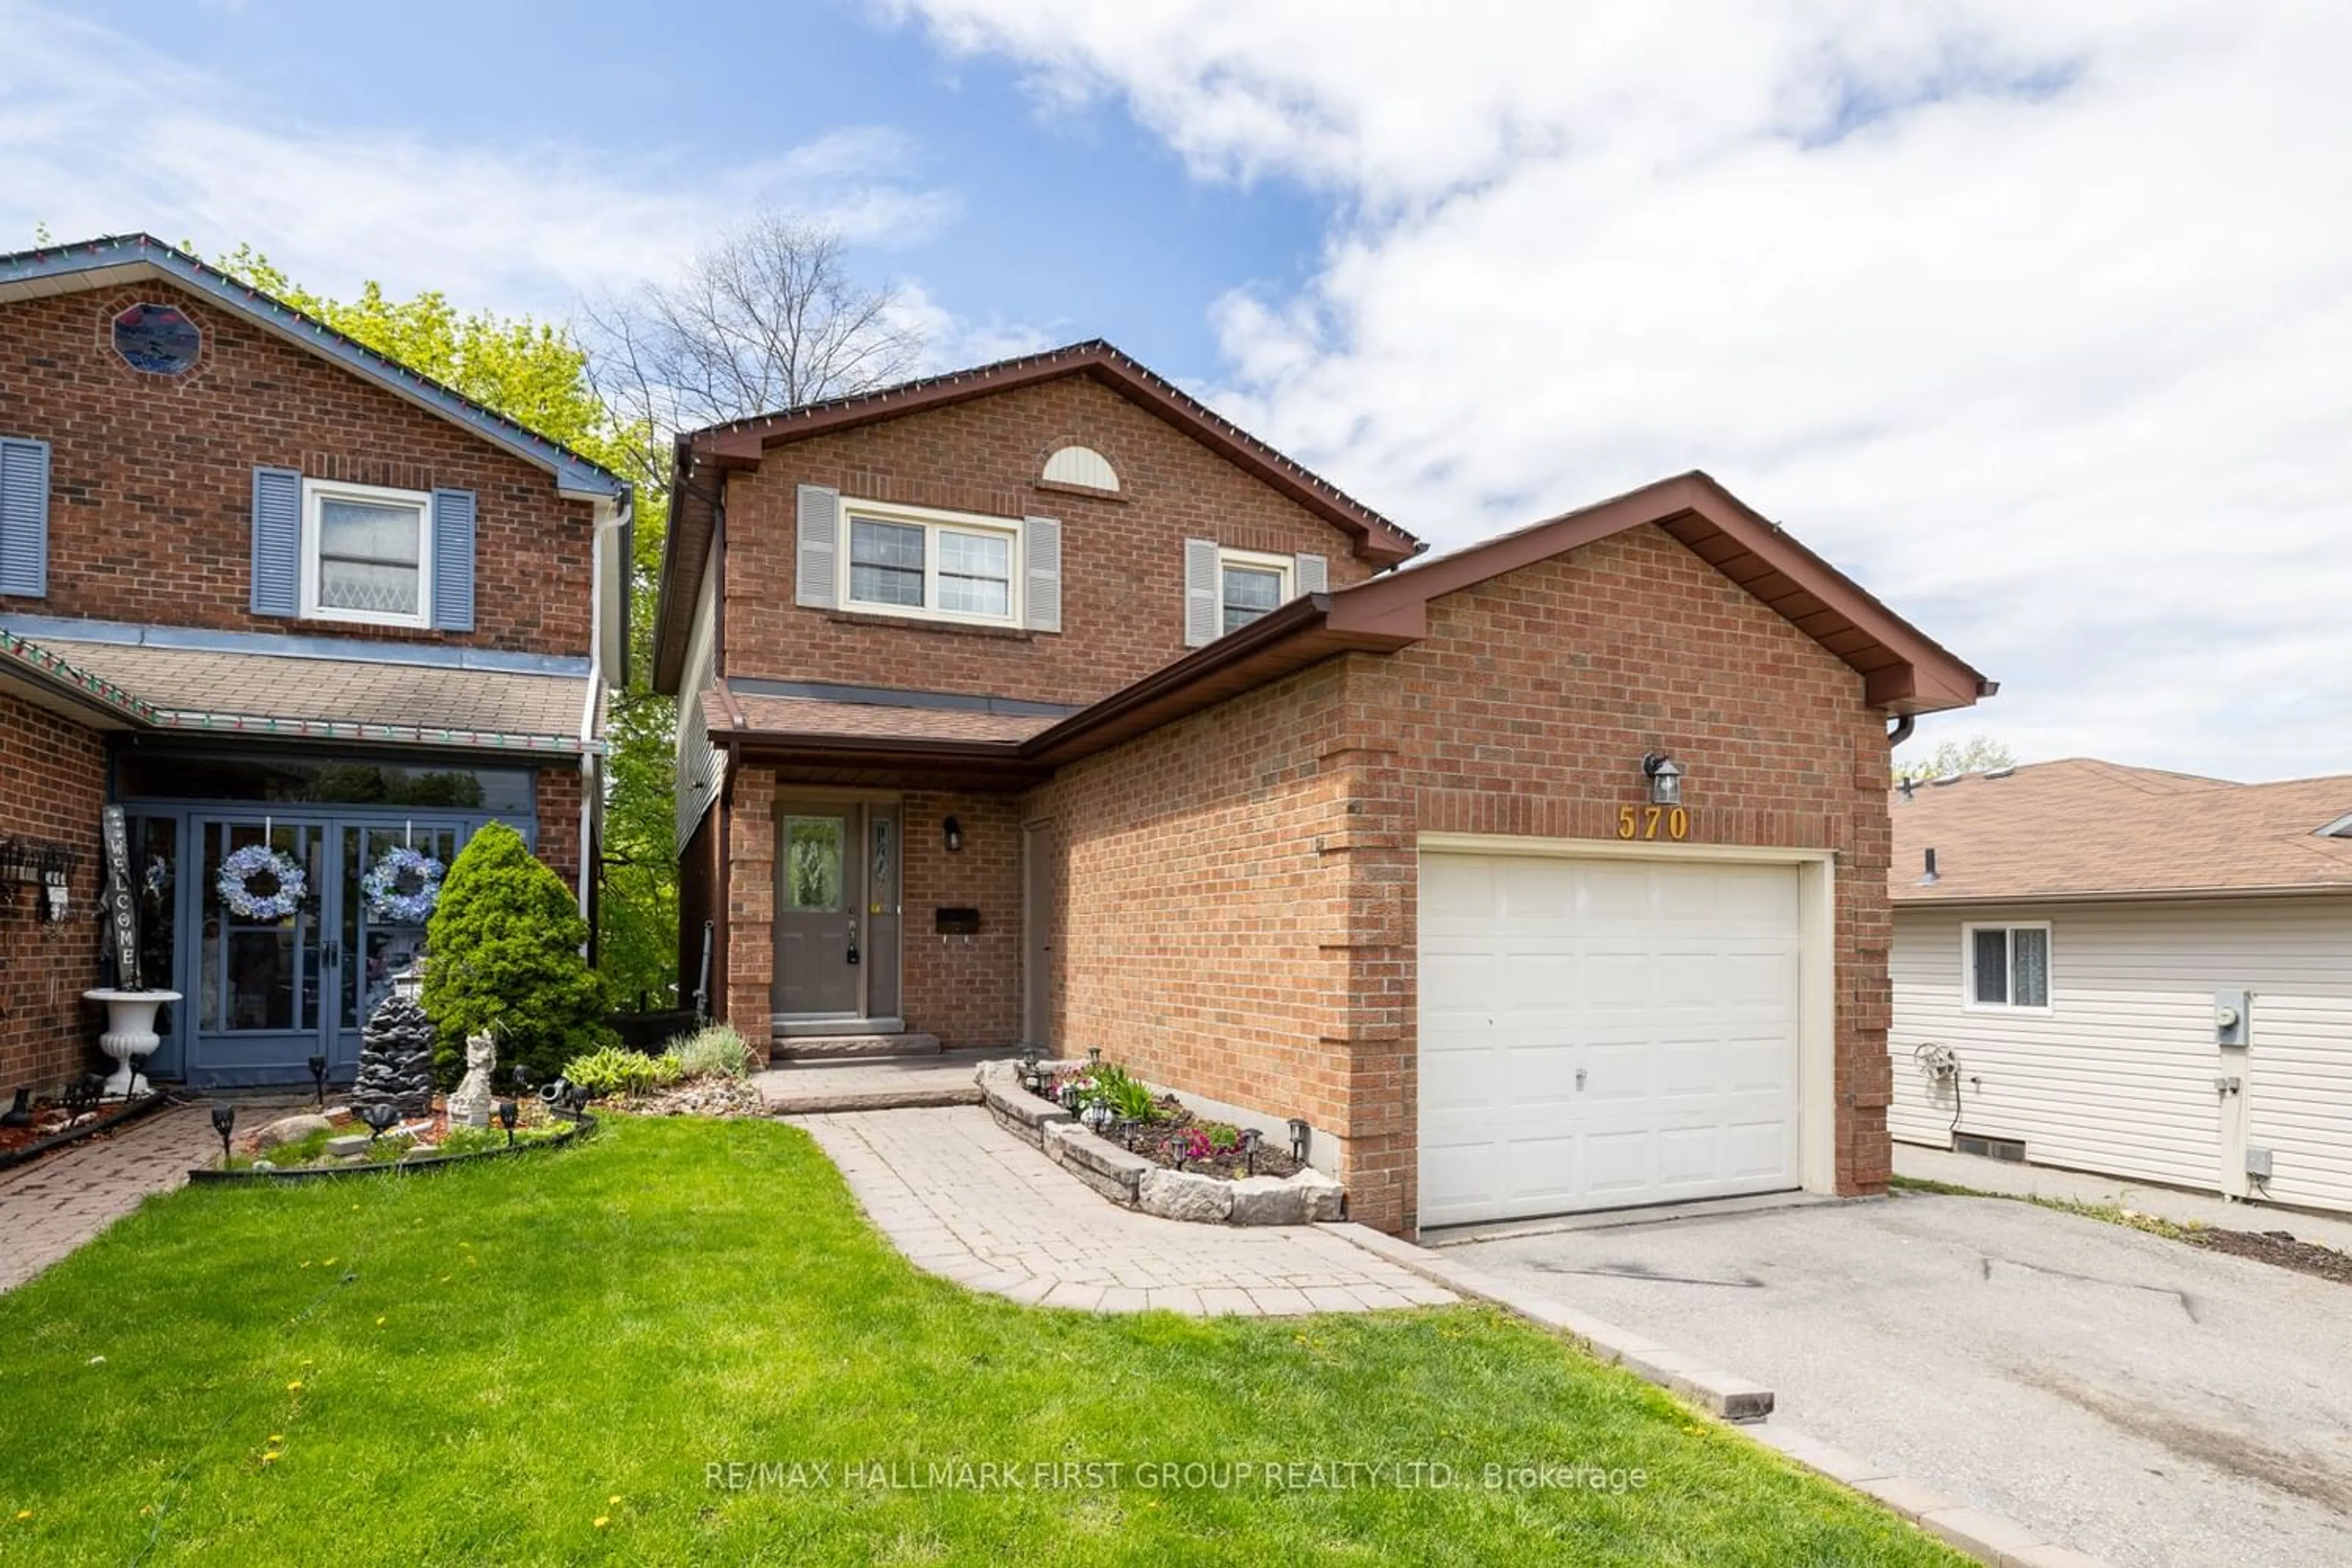 Home with brick exterior material for 570 Muirfield St, Oshawa Ontario L1H 8G4